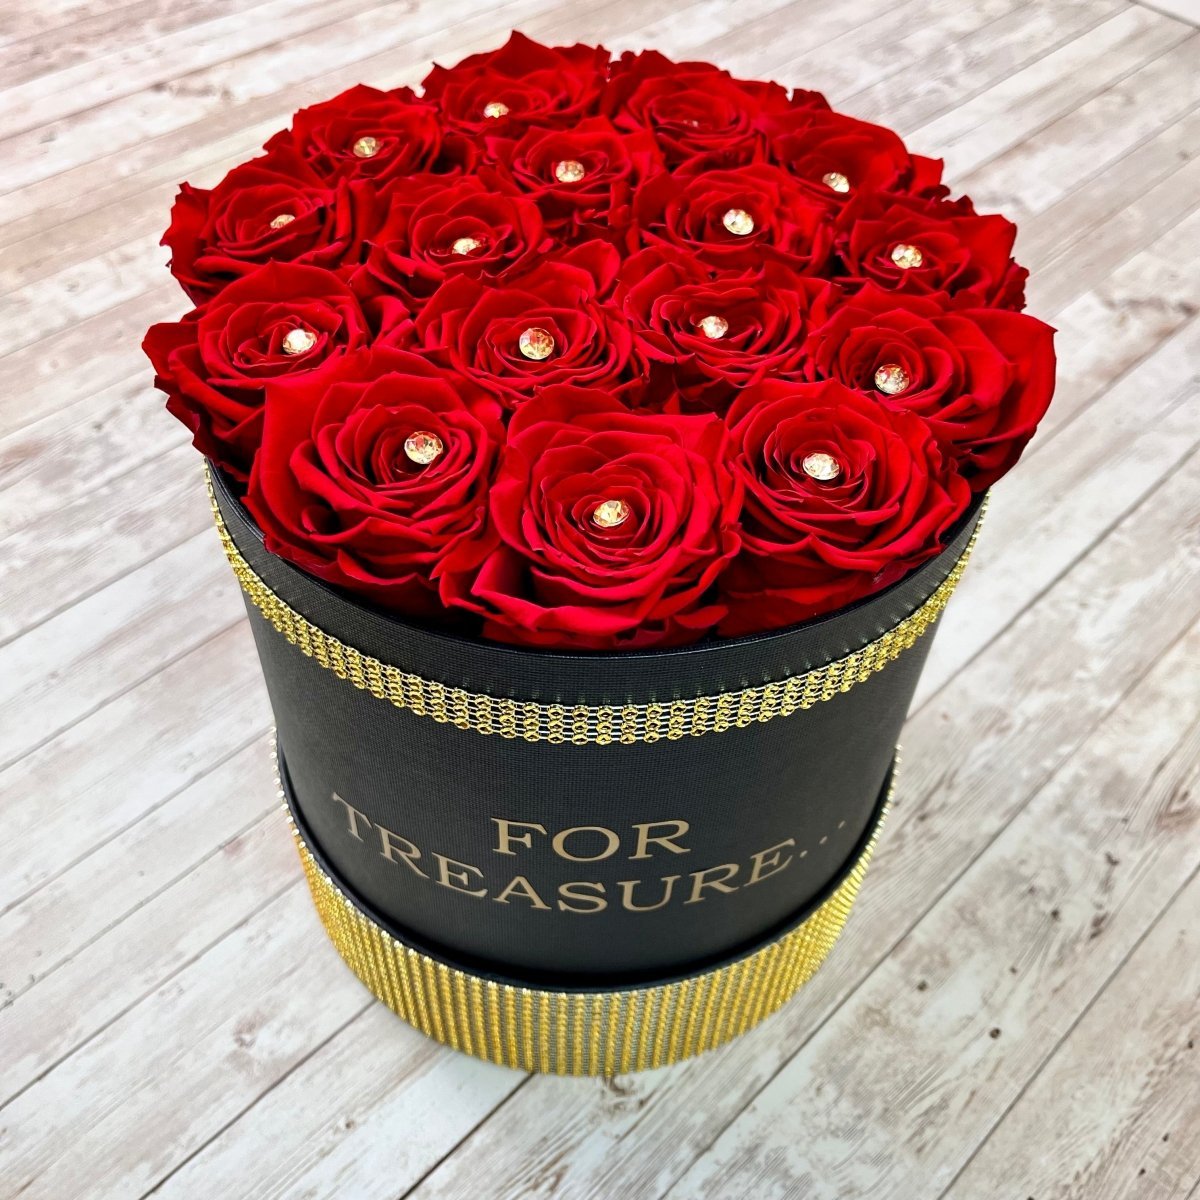 Enchanting Large Infinity Rose Box - Red Infinity Roses - One Year Roses - Gold Diamanté Box - Boxed Roses